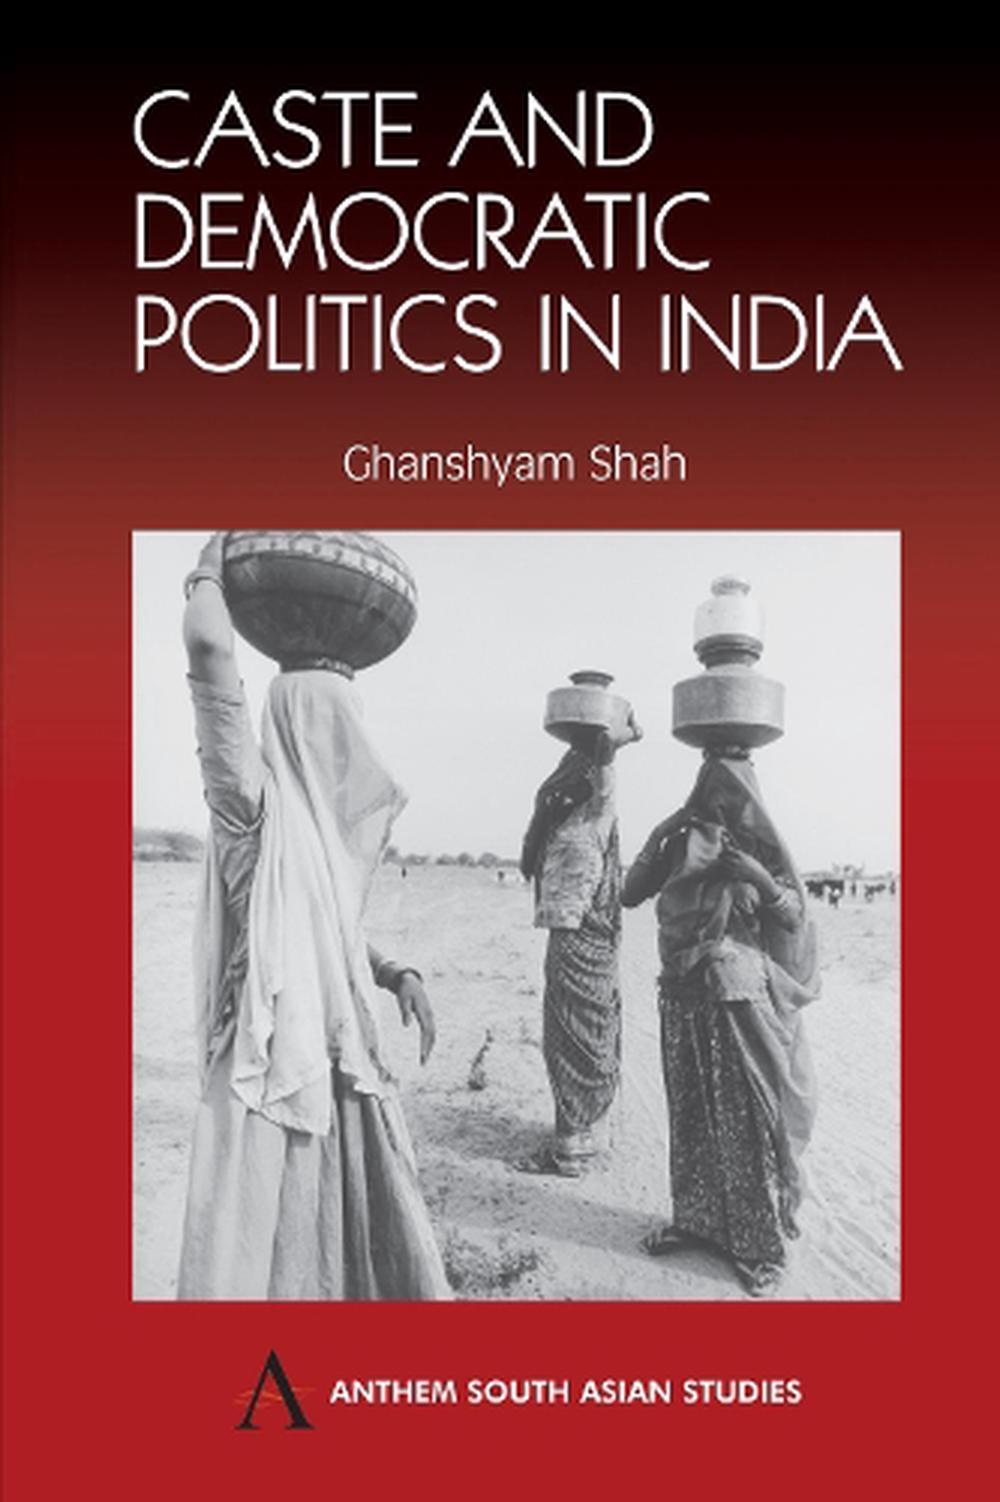 essay on religion and caste based politics in india